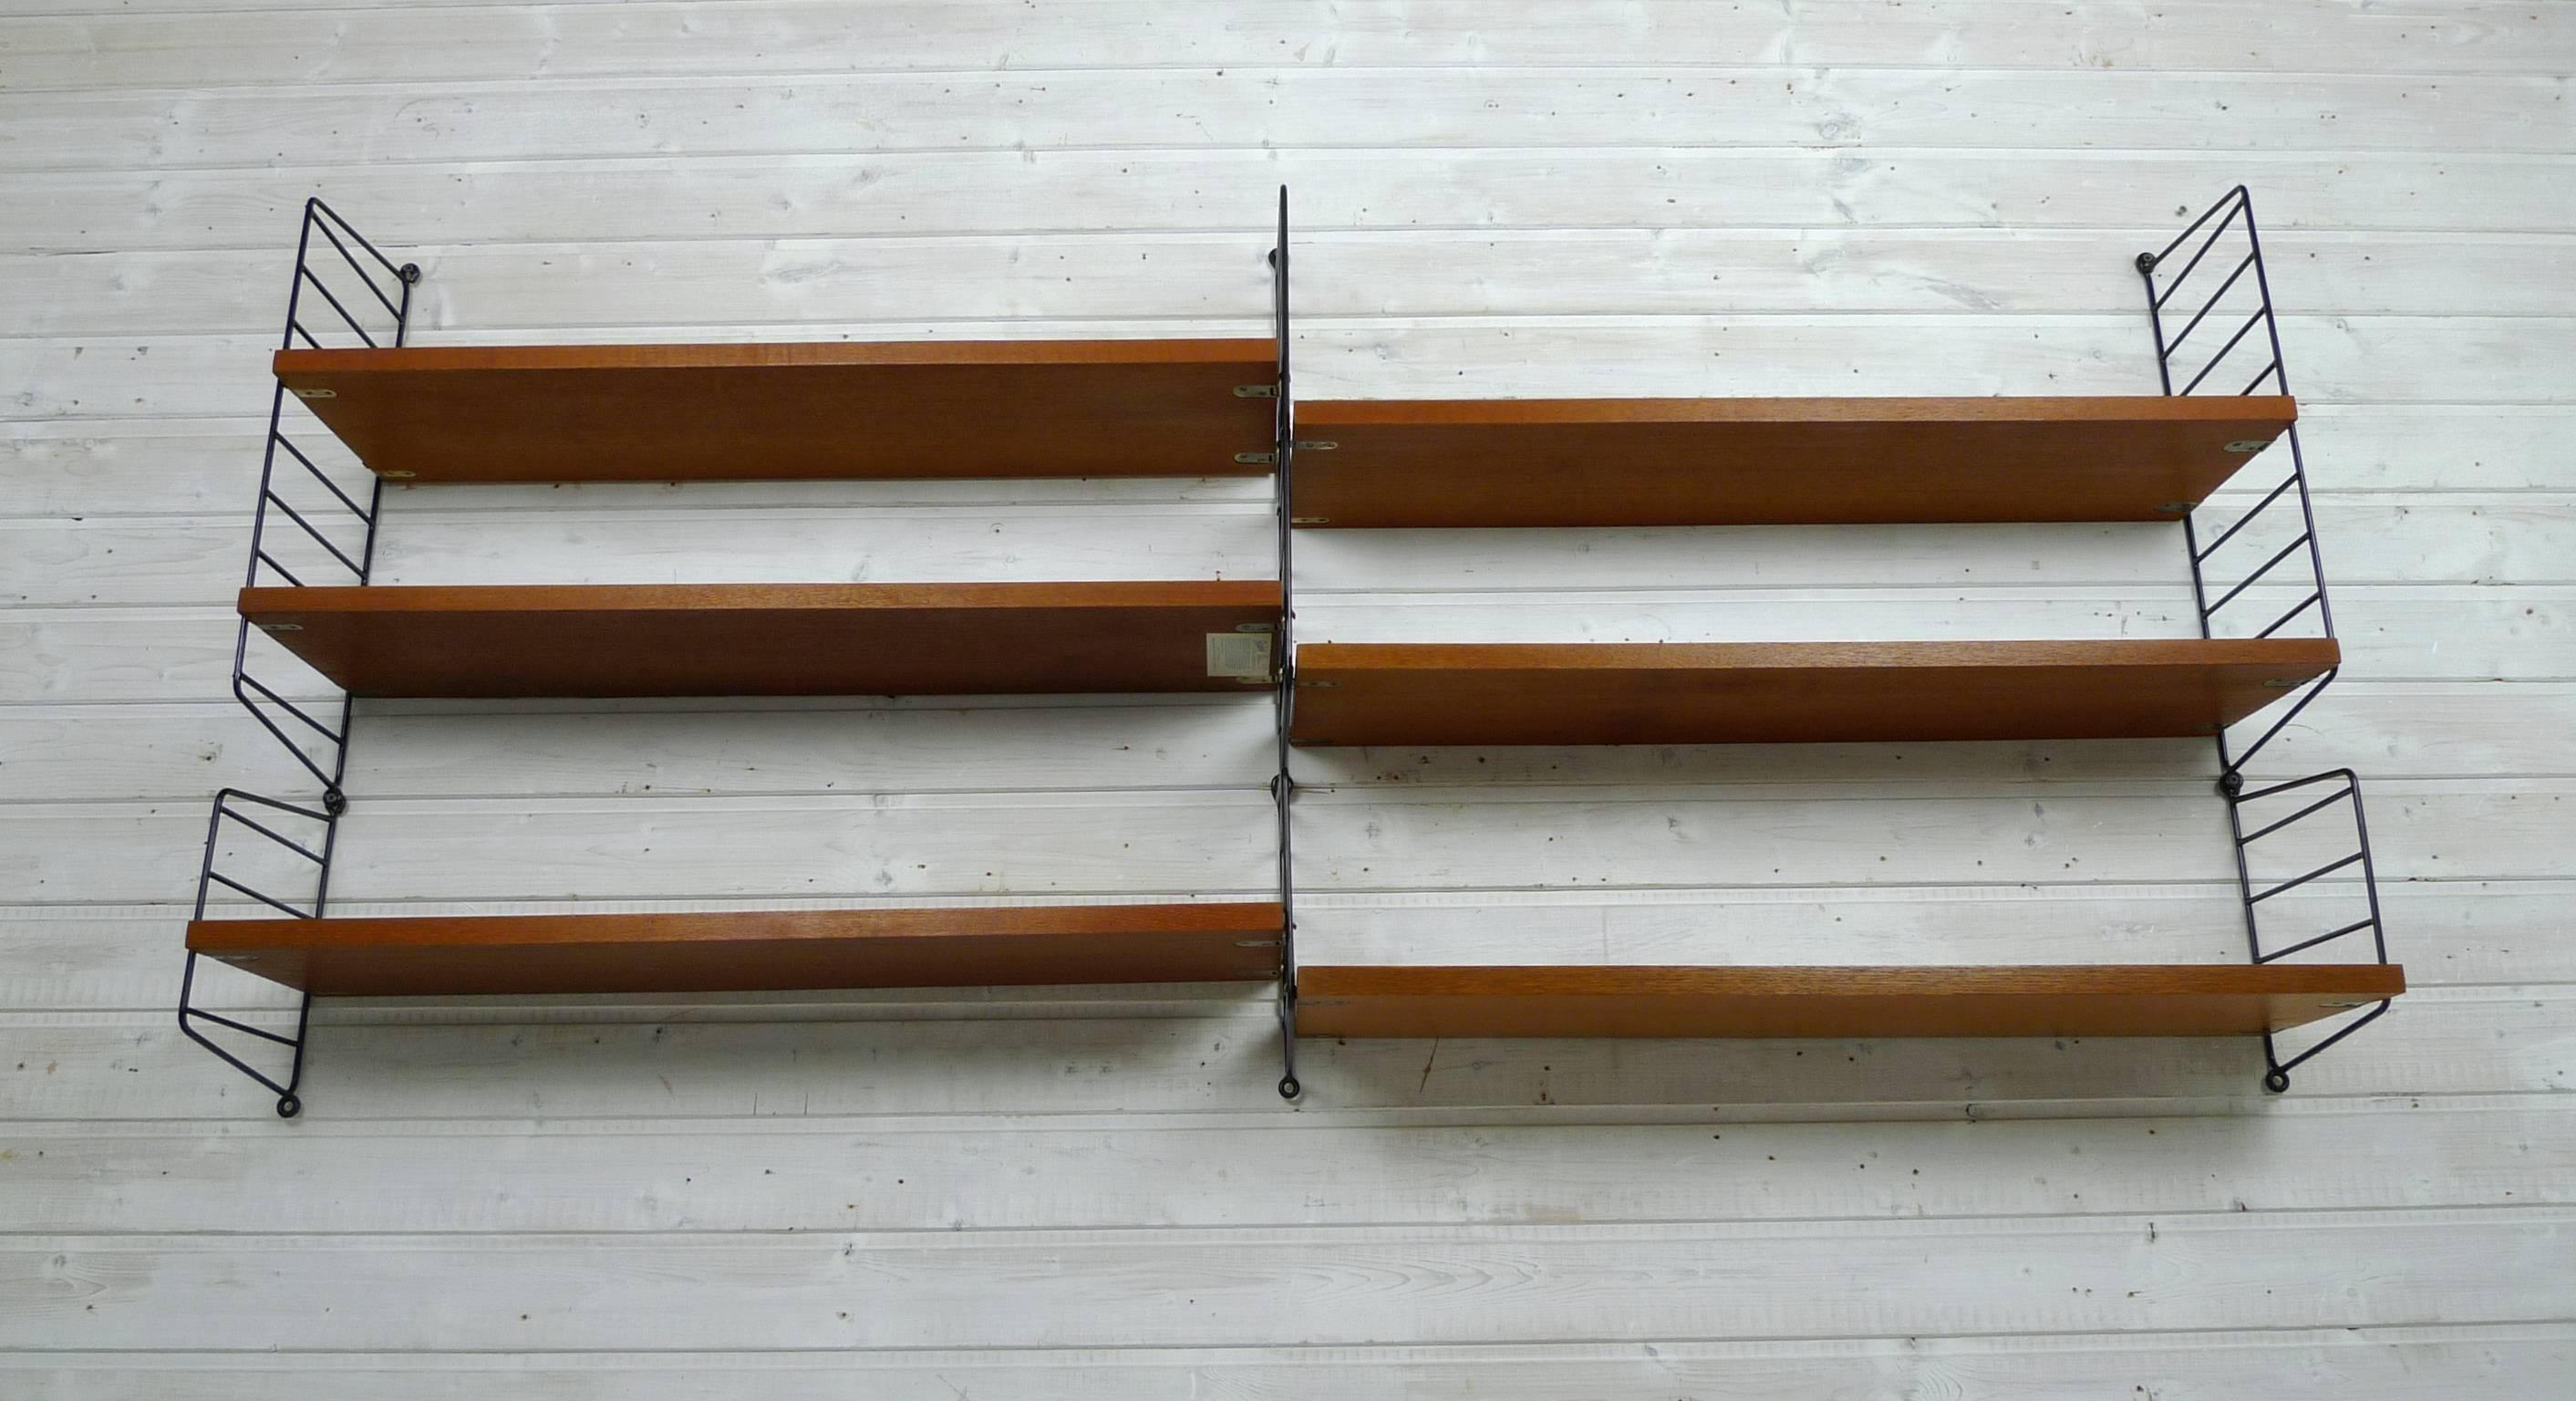 Scandinavian Modern Swedish Wall Unit with Six Teak Shelves by Nisse Strinning for String, 1950s